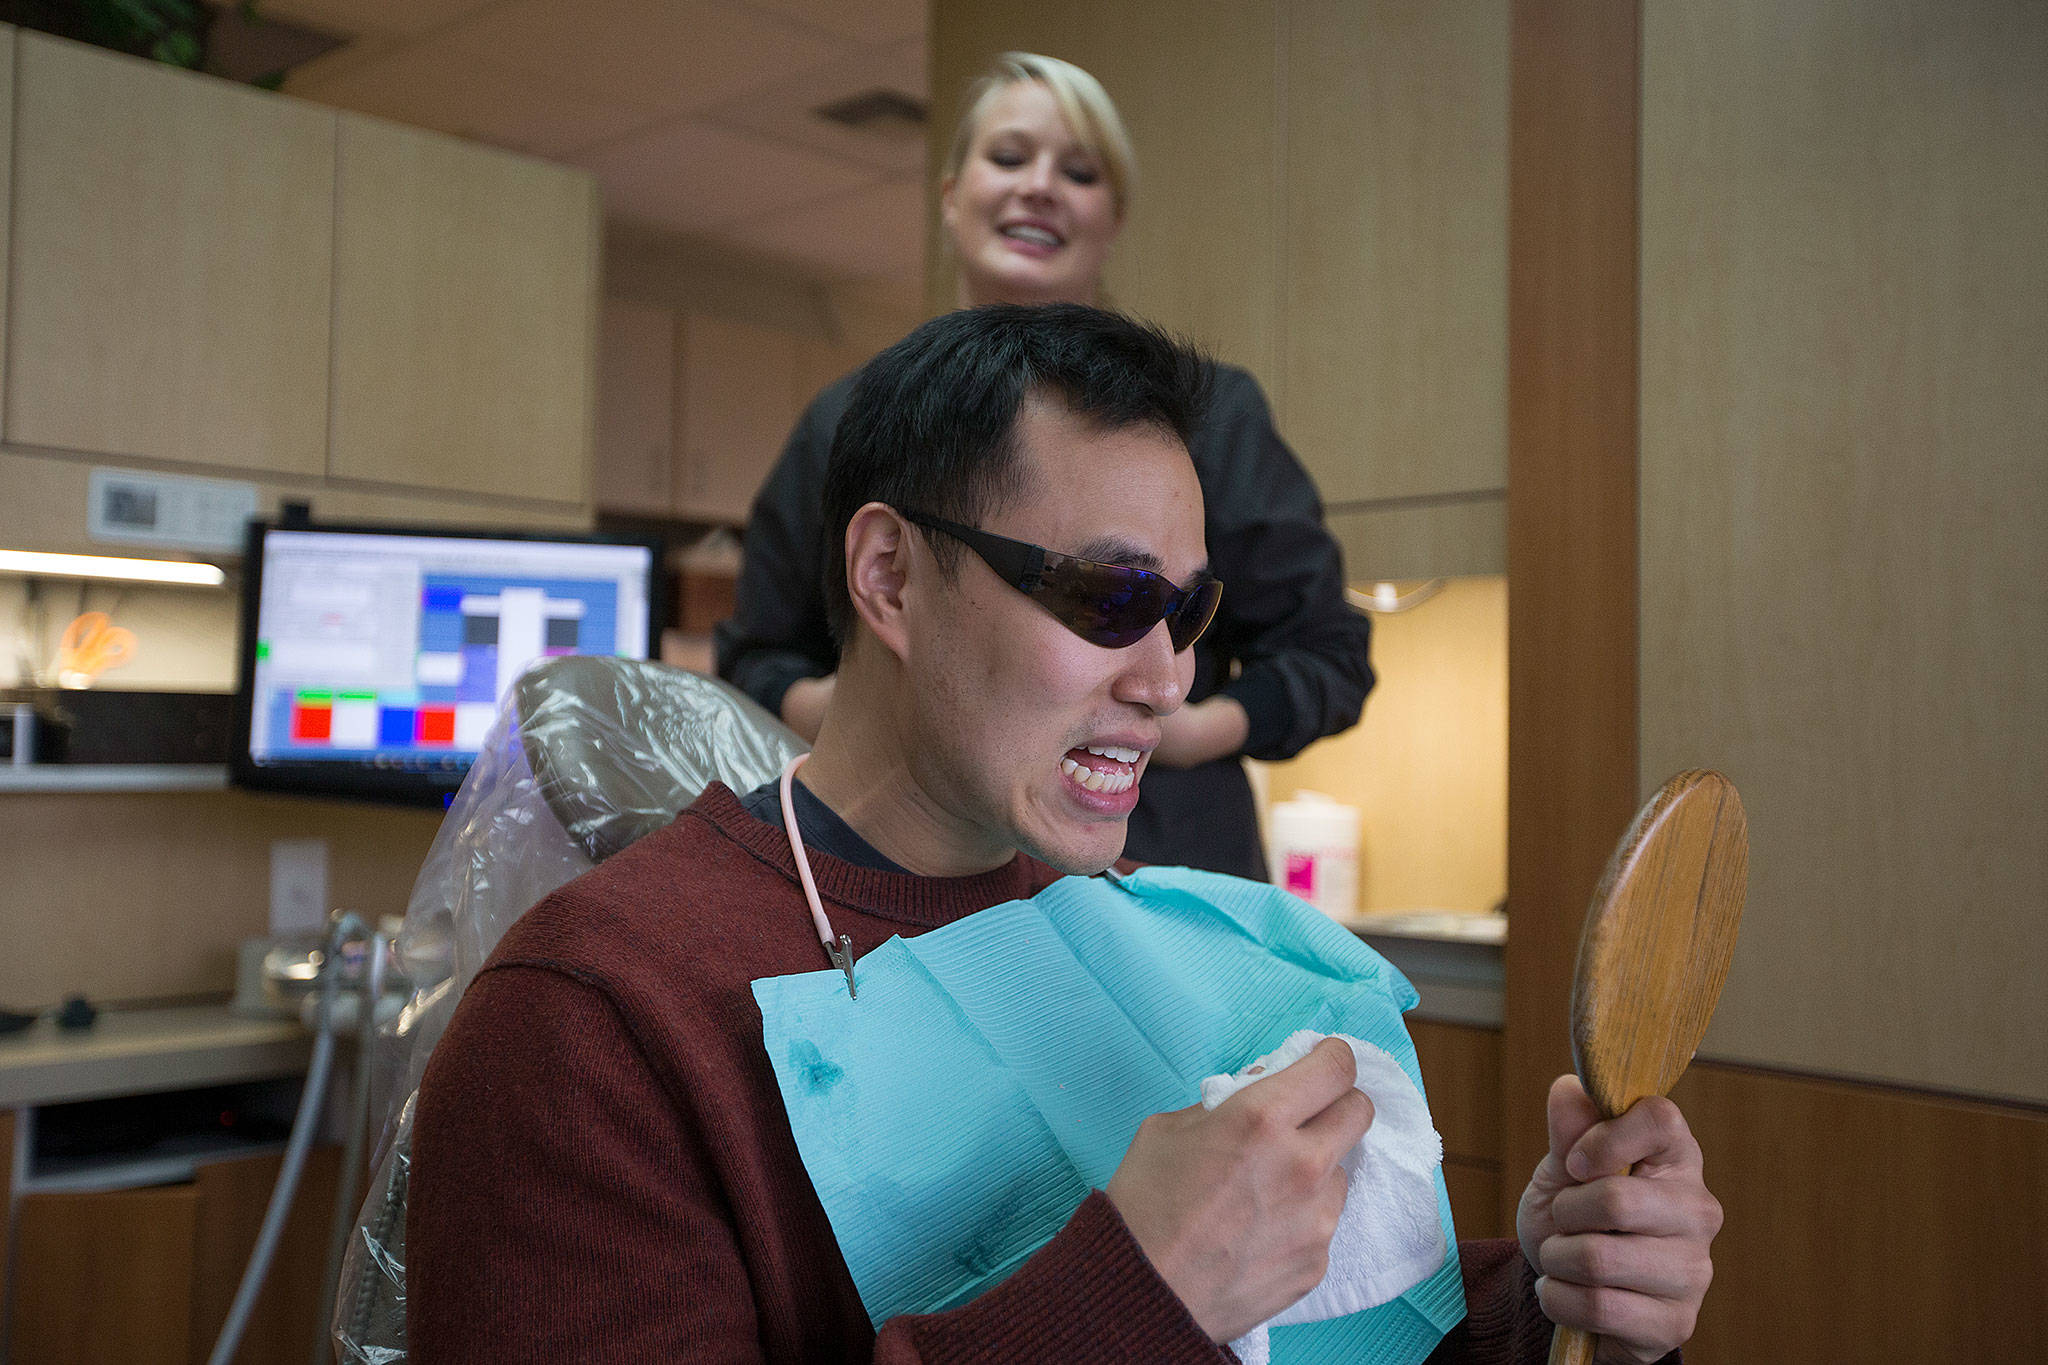 After undergoing cosmetic dental work Friday, Navy veteran Jung Hwang checks out his teeth as dental assistant Eva Russell looks on at All Smiles Northwest in Everett. (Andy Bronson / The Herald)